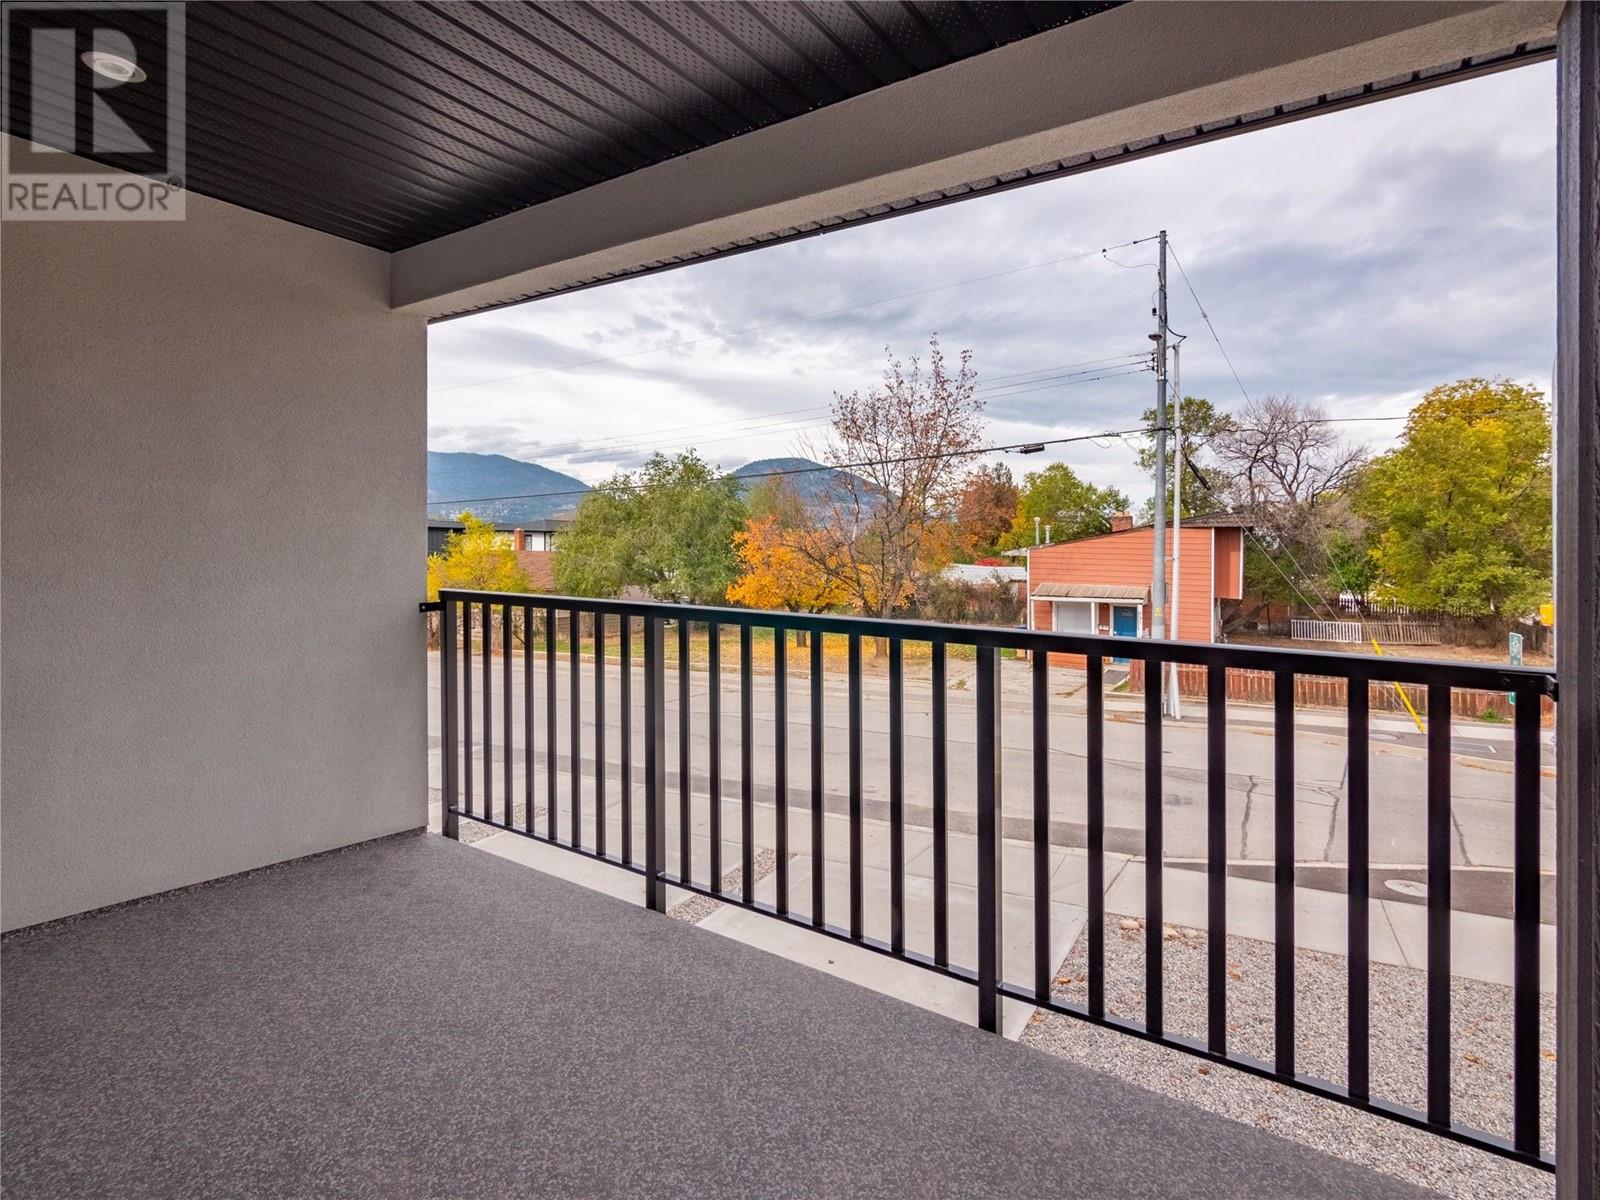 #2 592 Forestbrook Drive,, Penticton, British Columbia  V2A 4T8 - Photo 29 - 201627